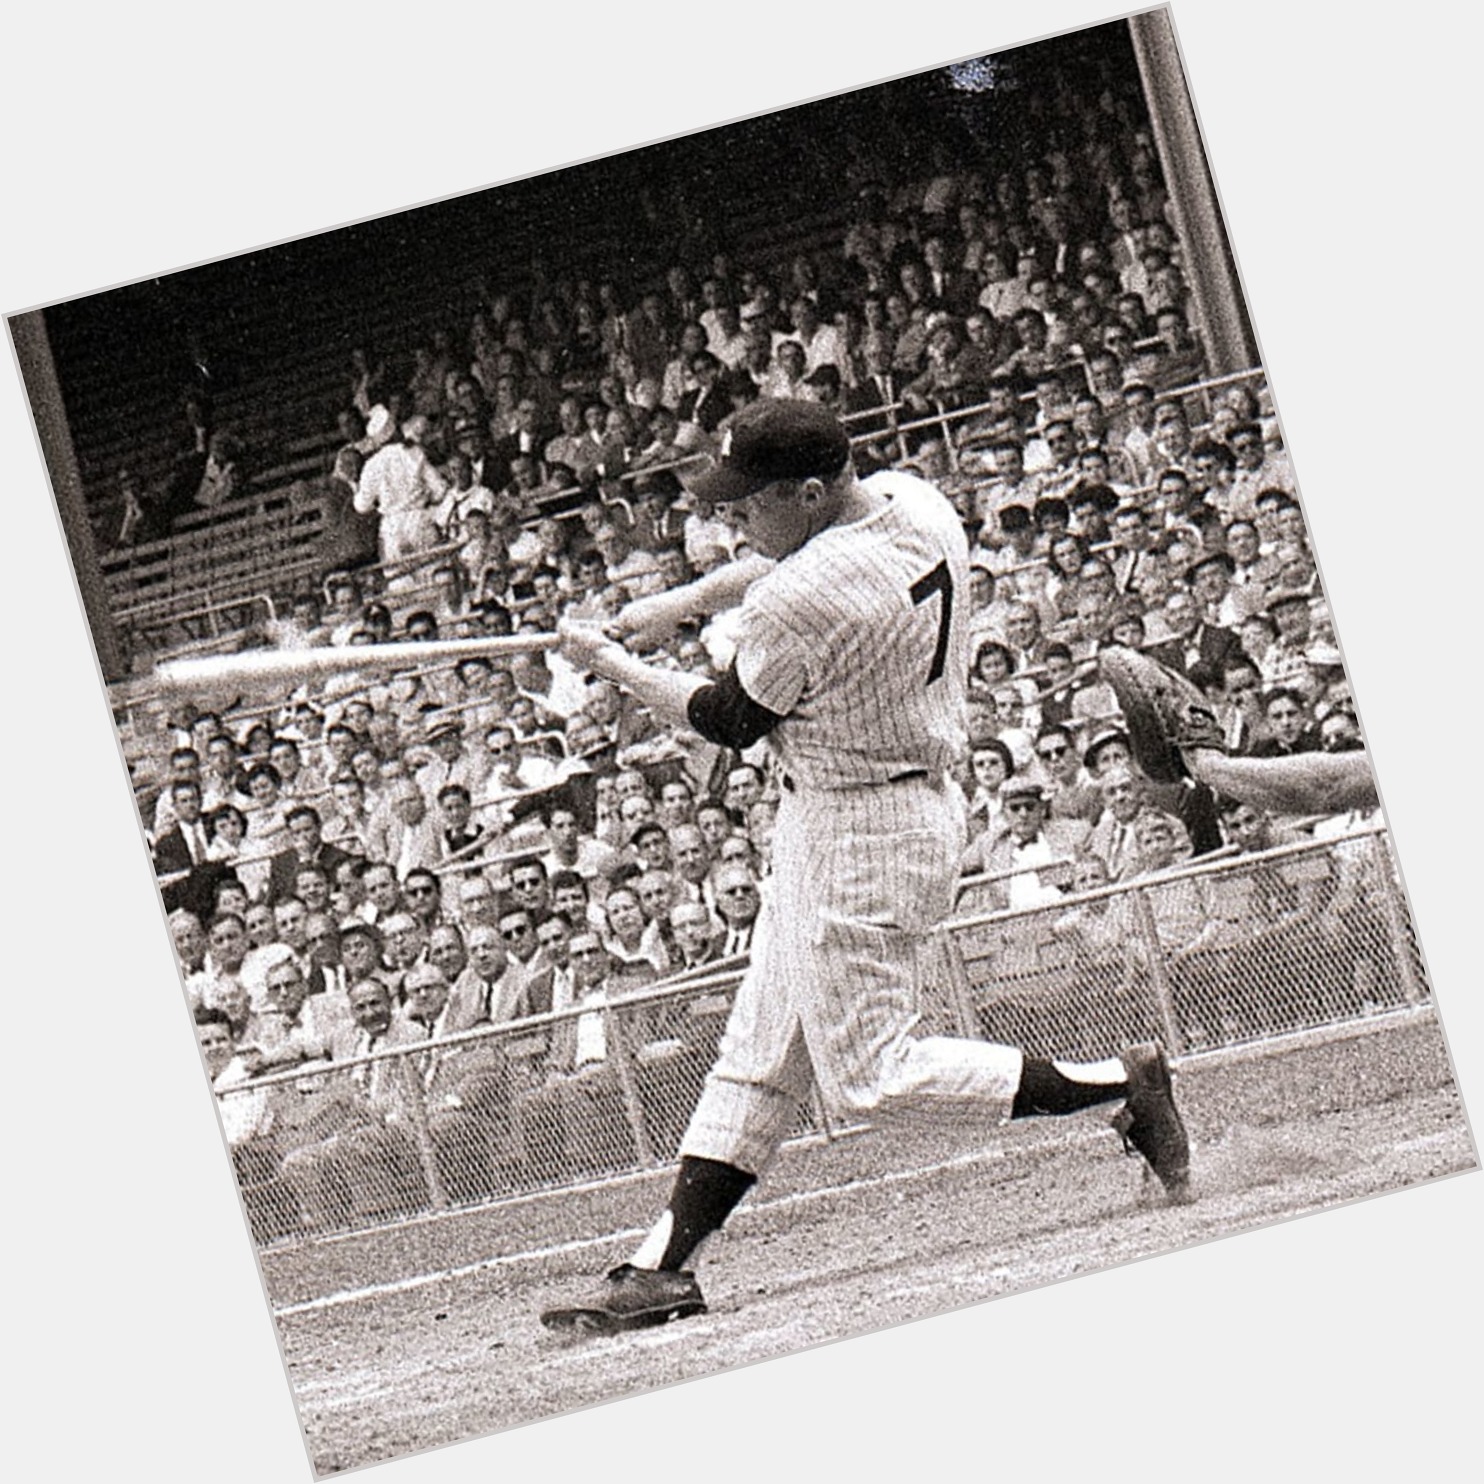 Happy Birthday to the great New York Yankee, Mickey Mantle! His spirit forever lives on. 